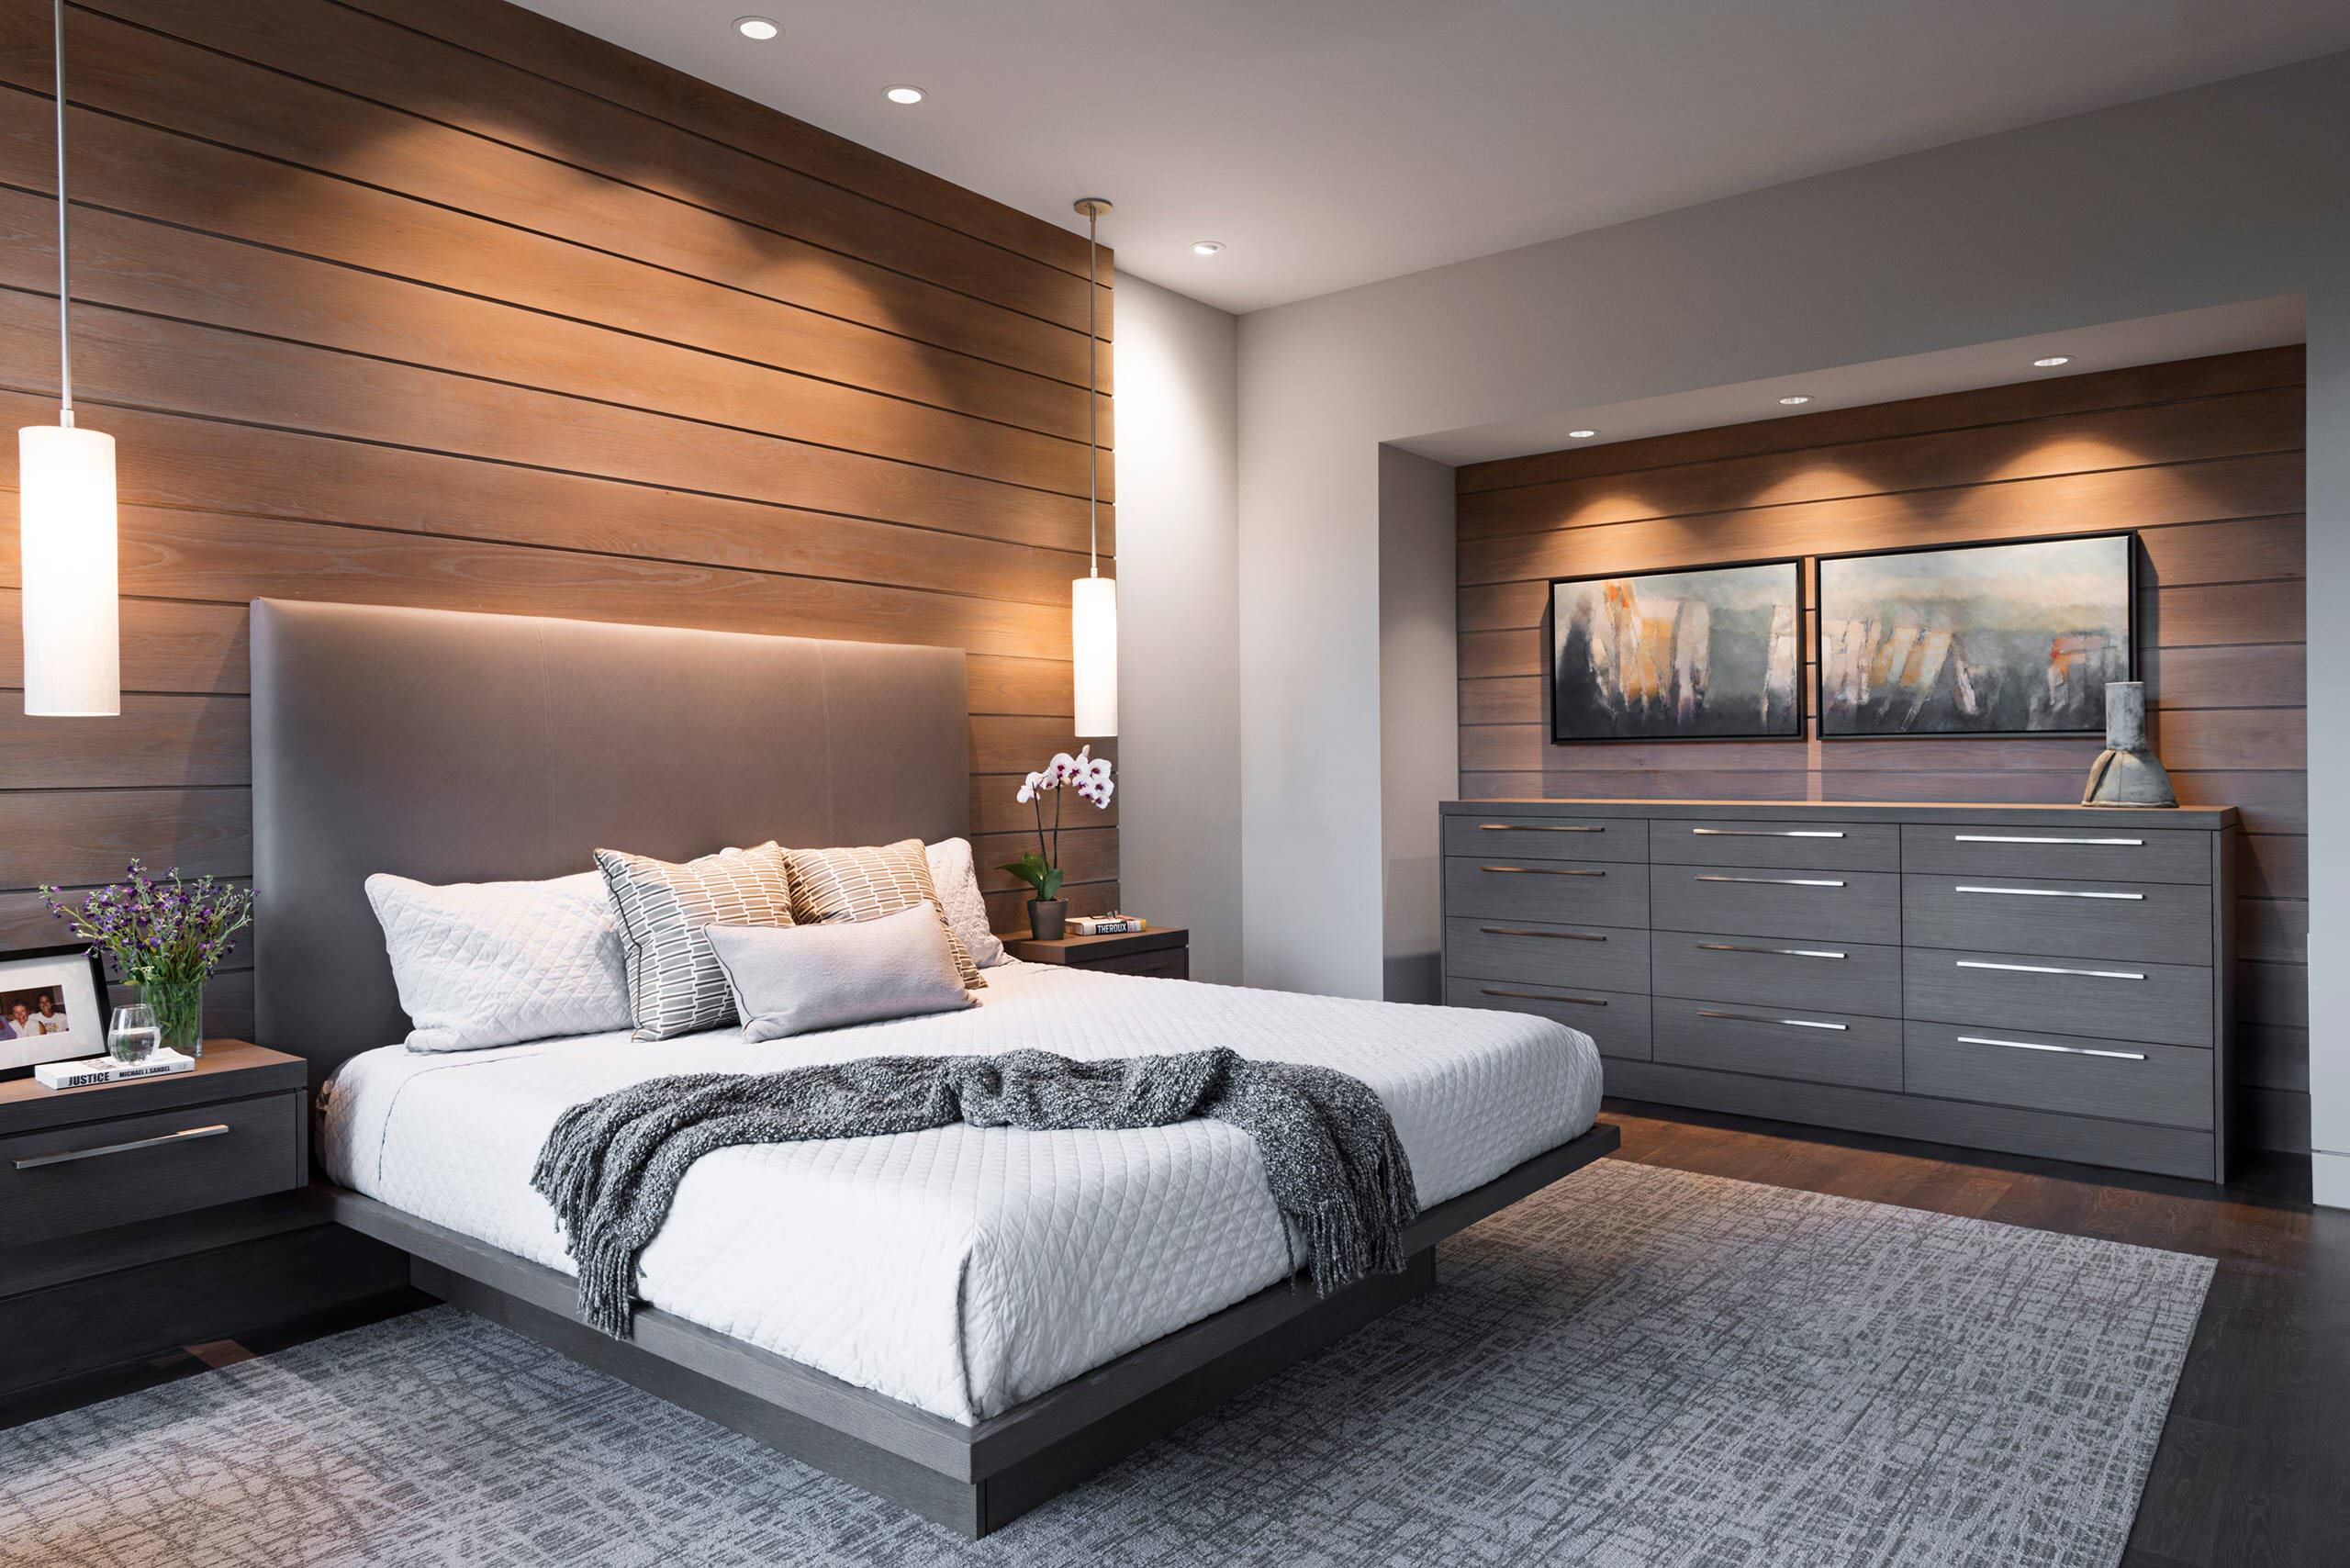 Wooden Bed Design Ideas For Your Bedroom